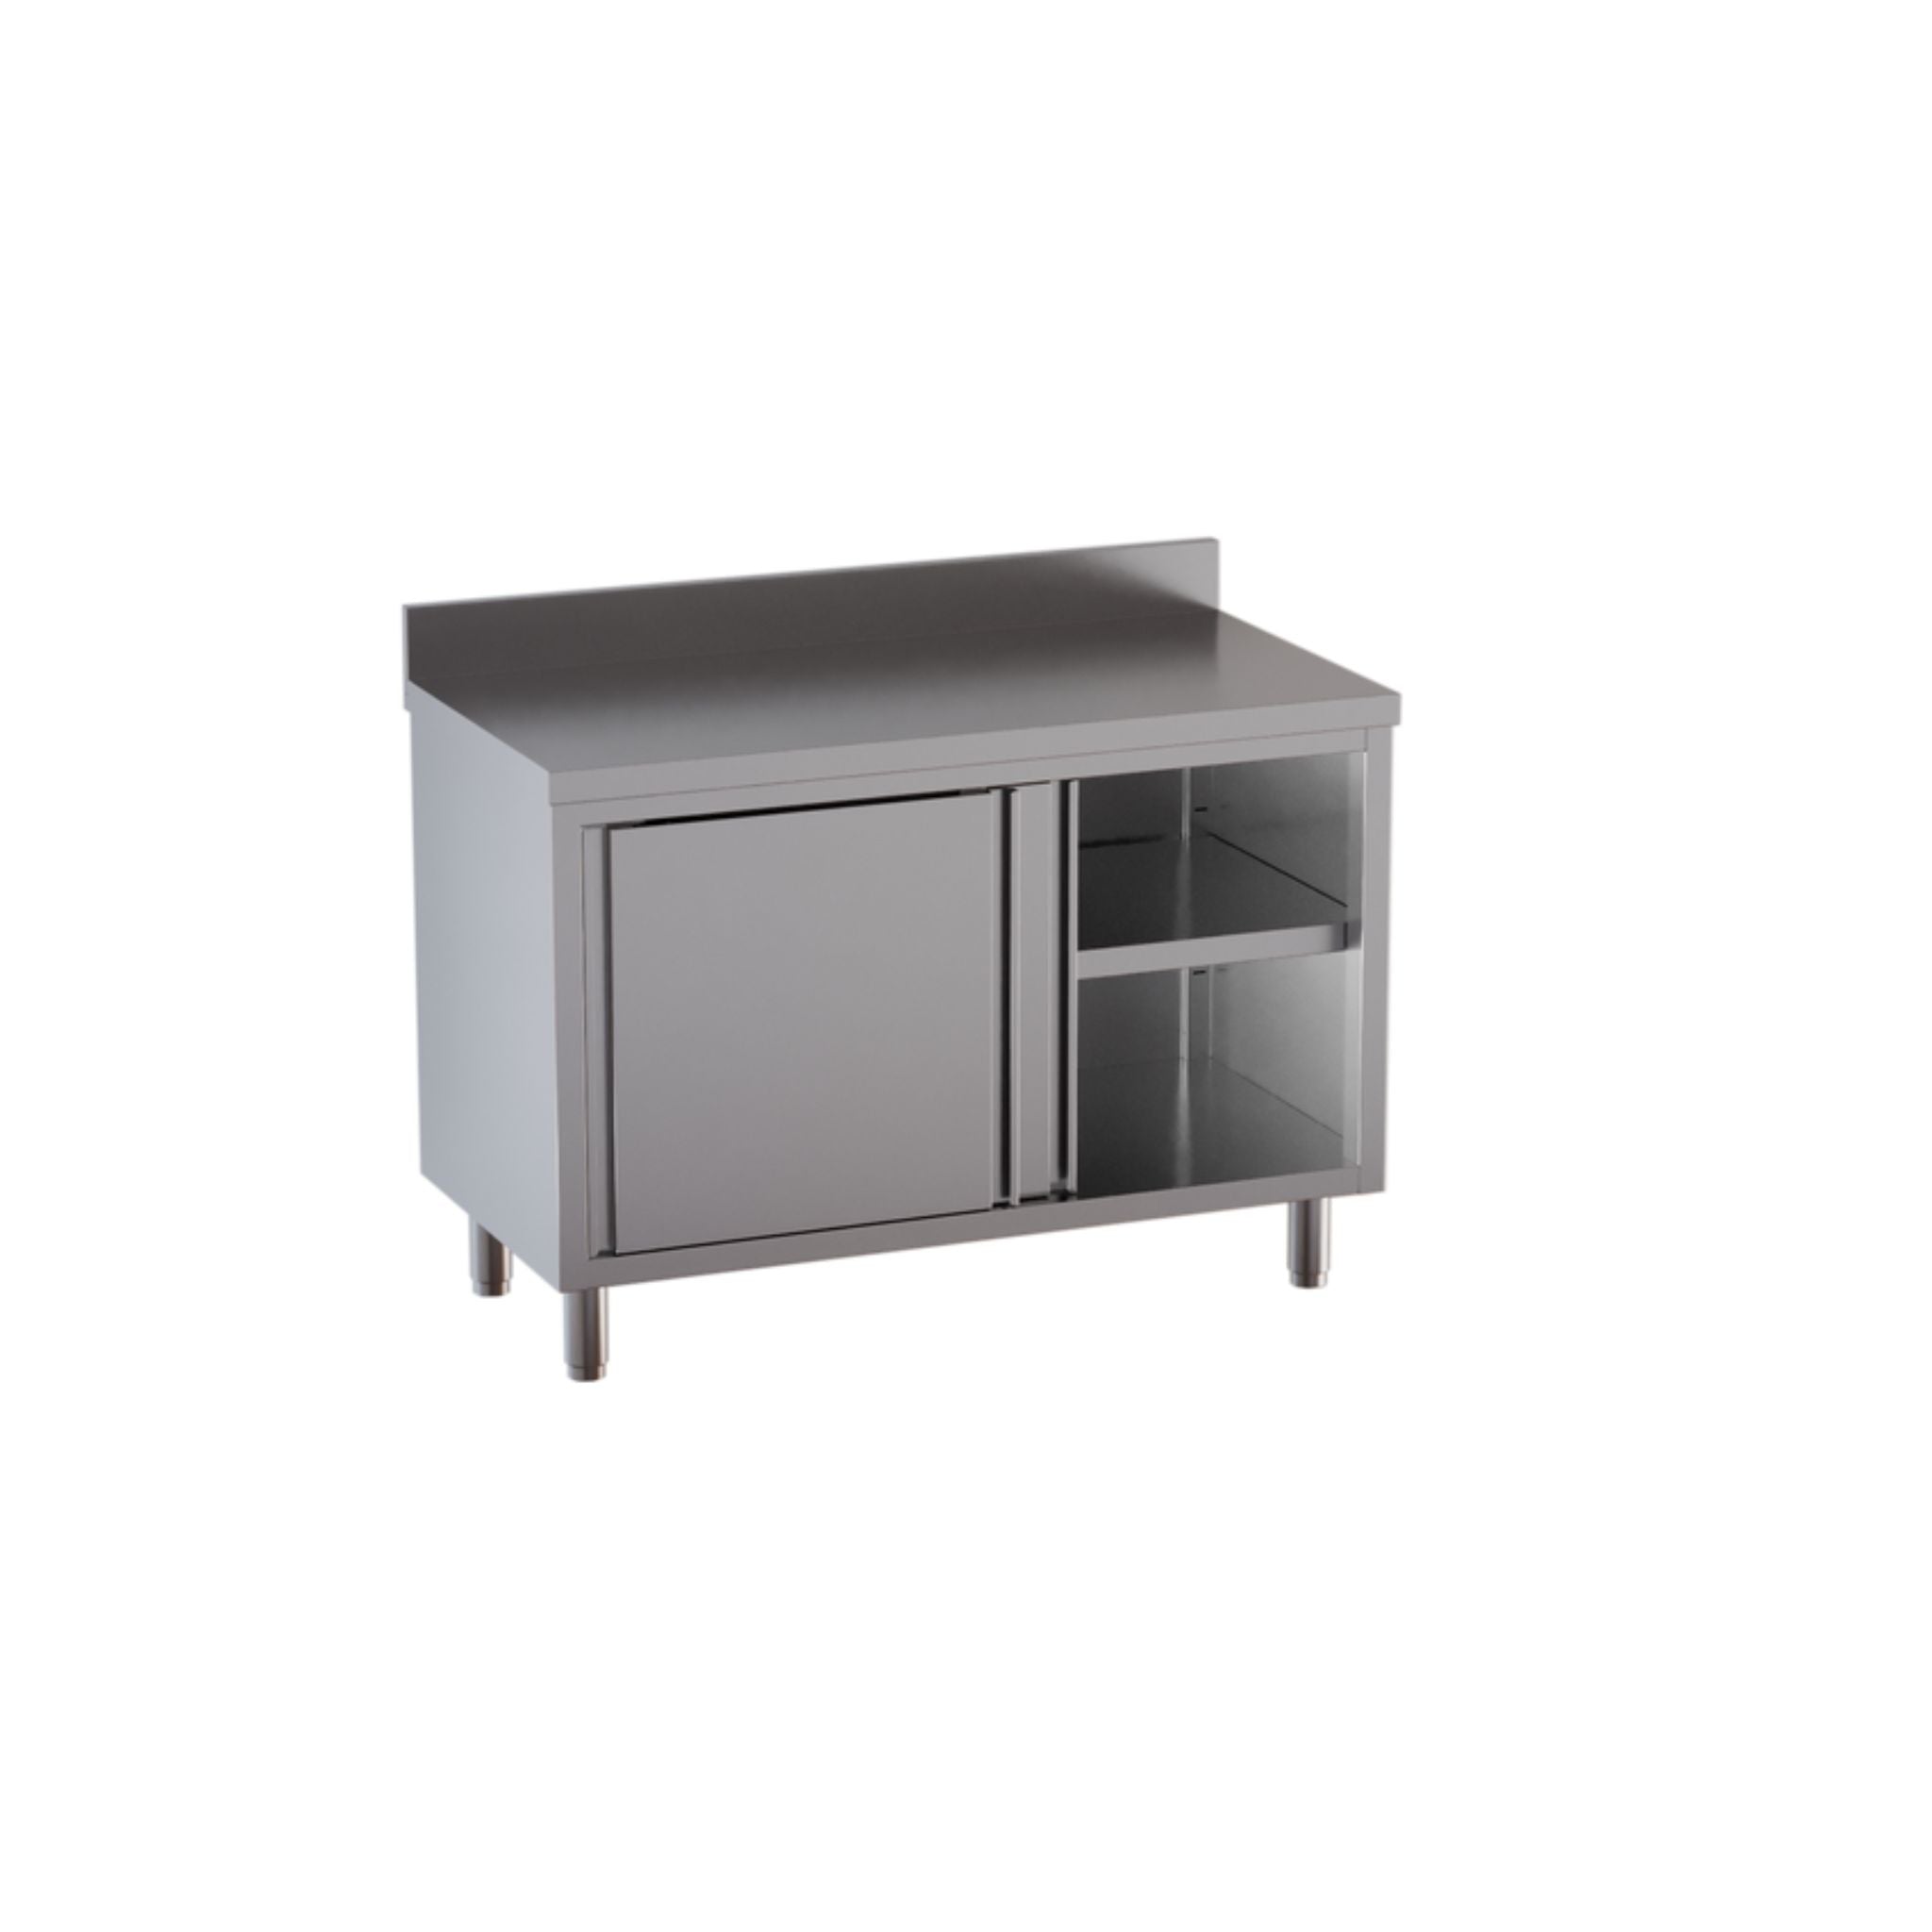 Standard stainless steel work cabinet with sliding doors